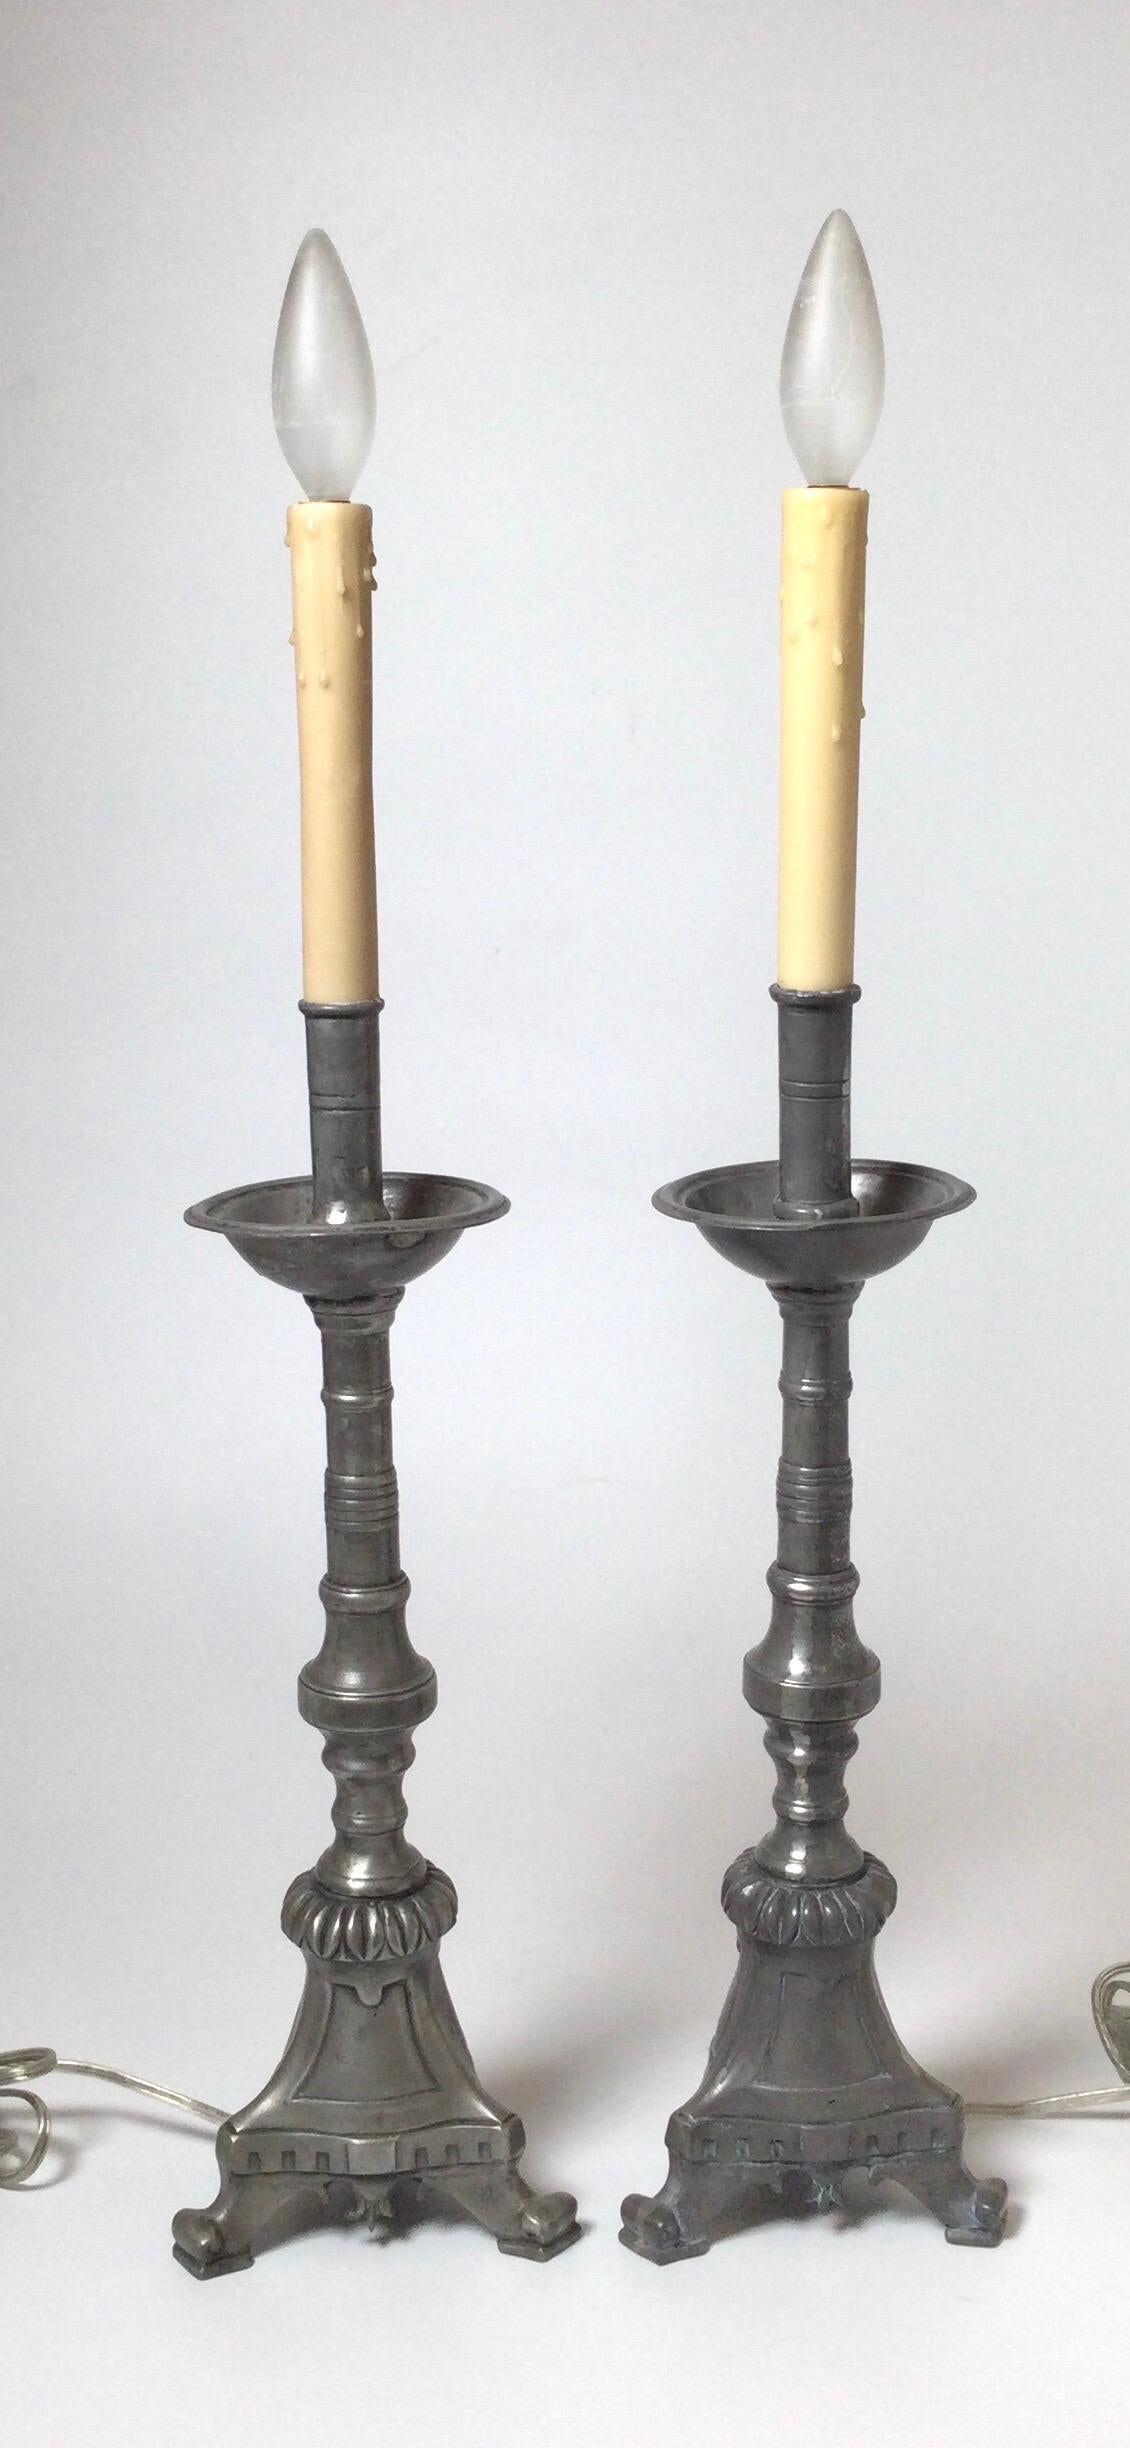 A pair of cast pewter candlesticks lamps with French parchment shades. The lamps alone are 5' wide, 5